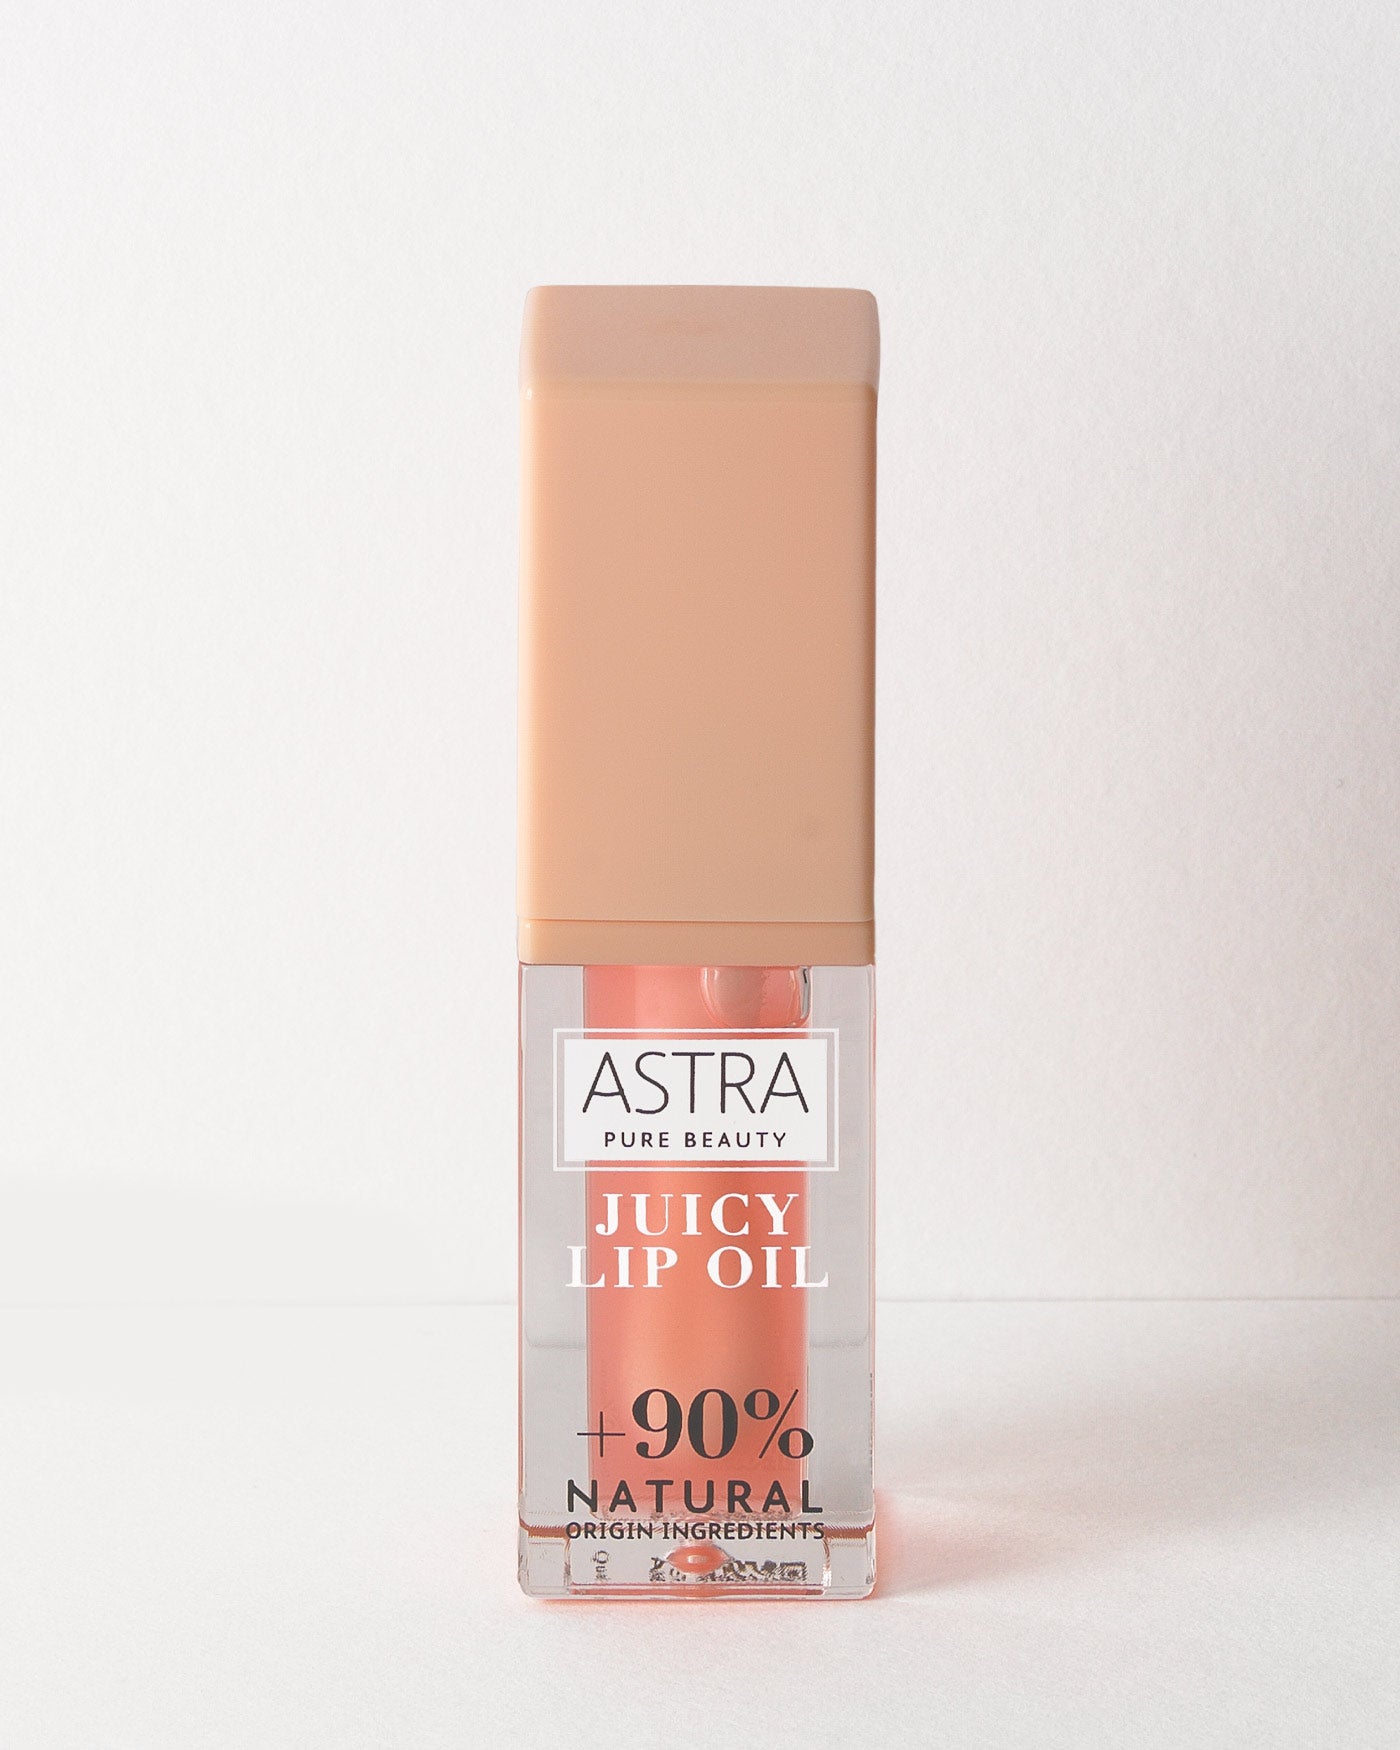 PURE BEAUTY JUICY LIP OIL - All Products - Astra Make-Up